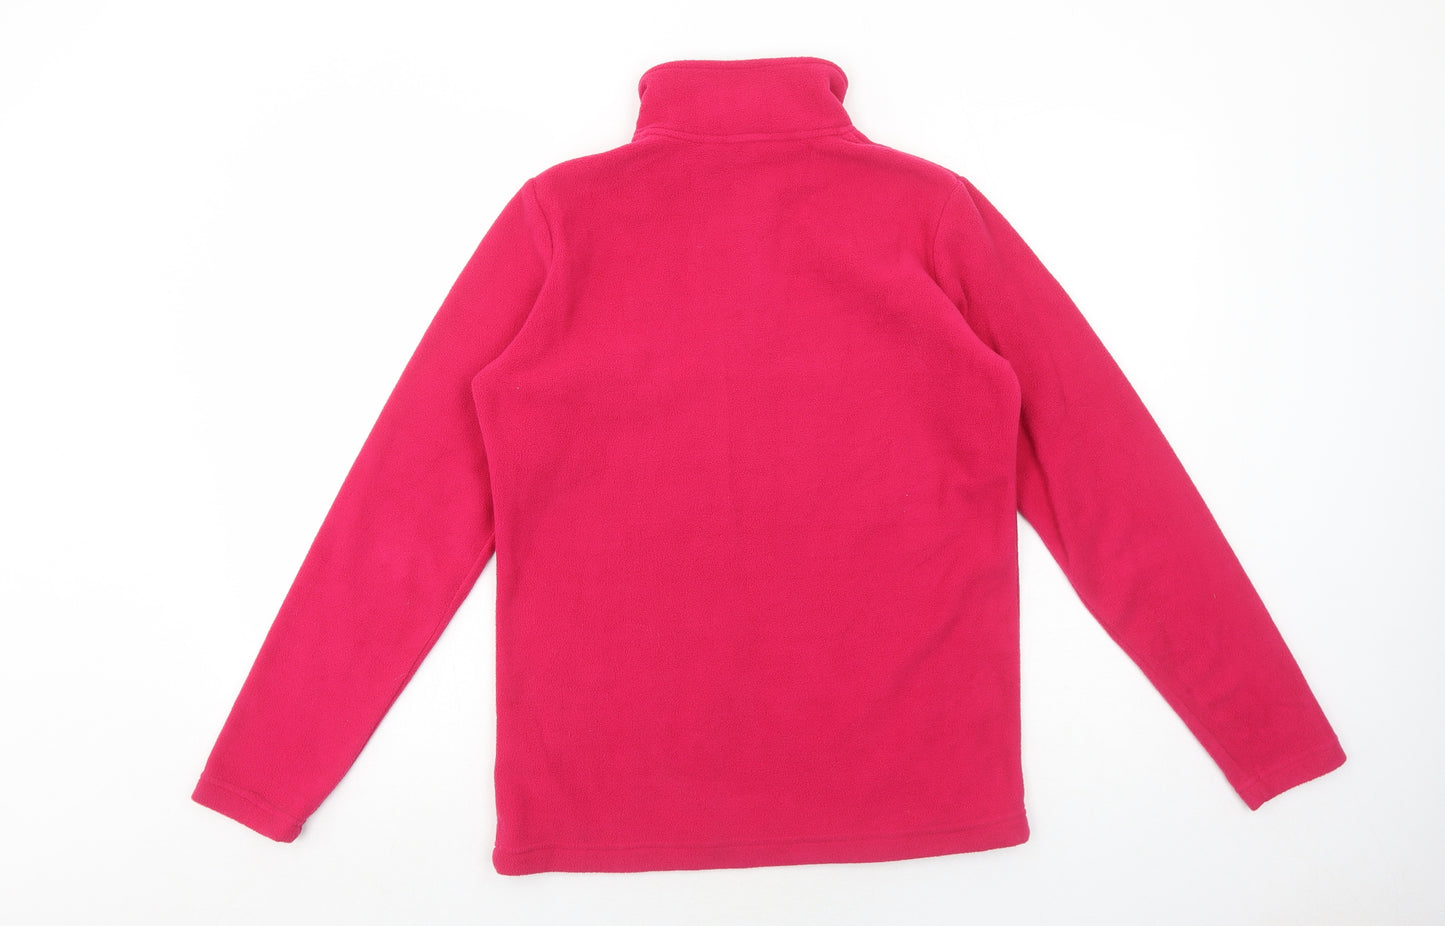 Freedom Trail Womens Pink Polyester Pullover Sweatshirt Size 8 Zip